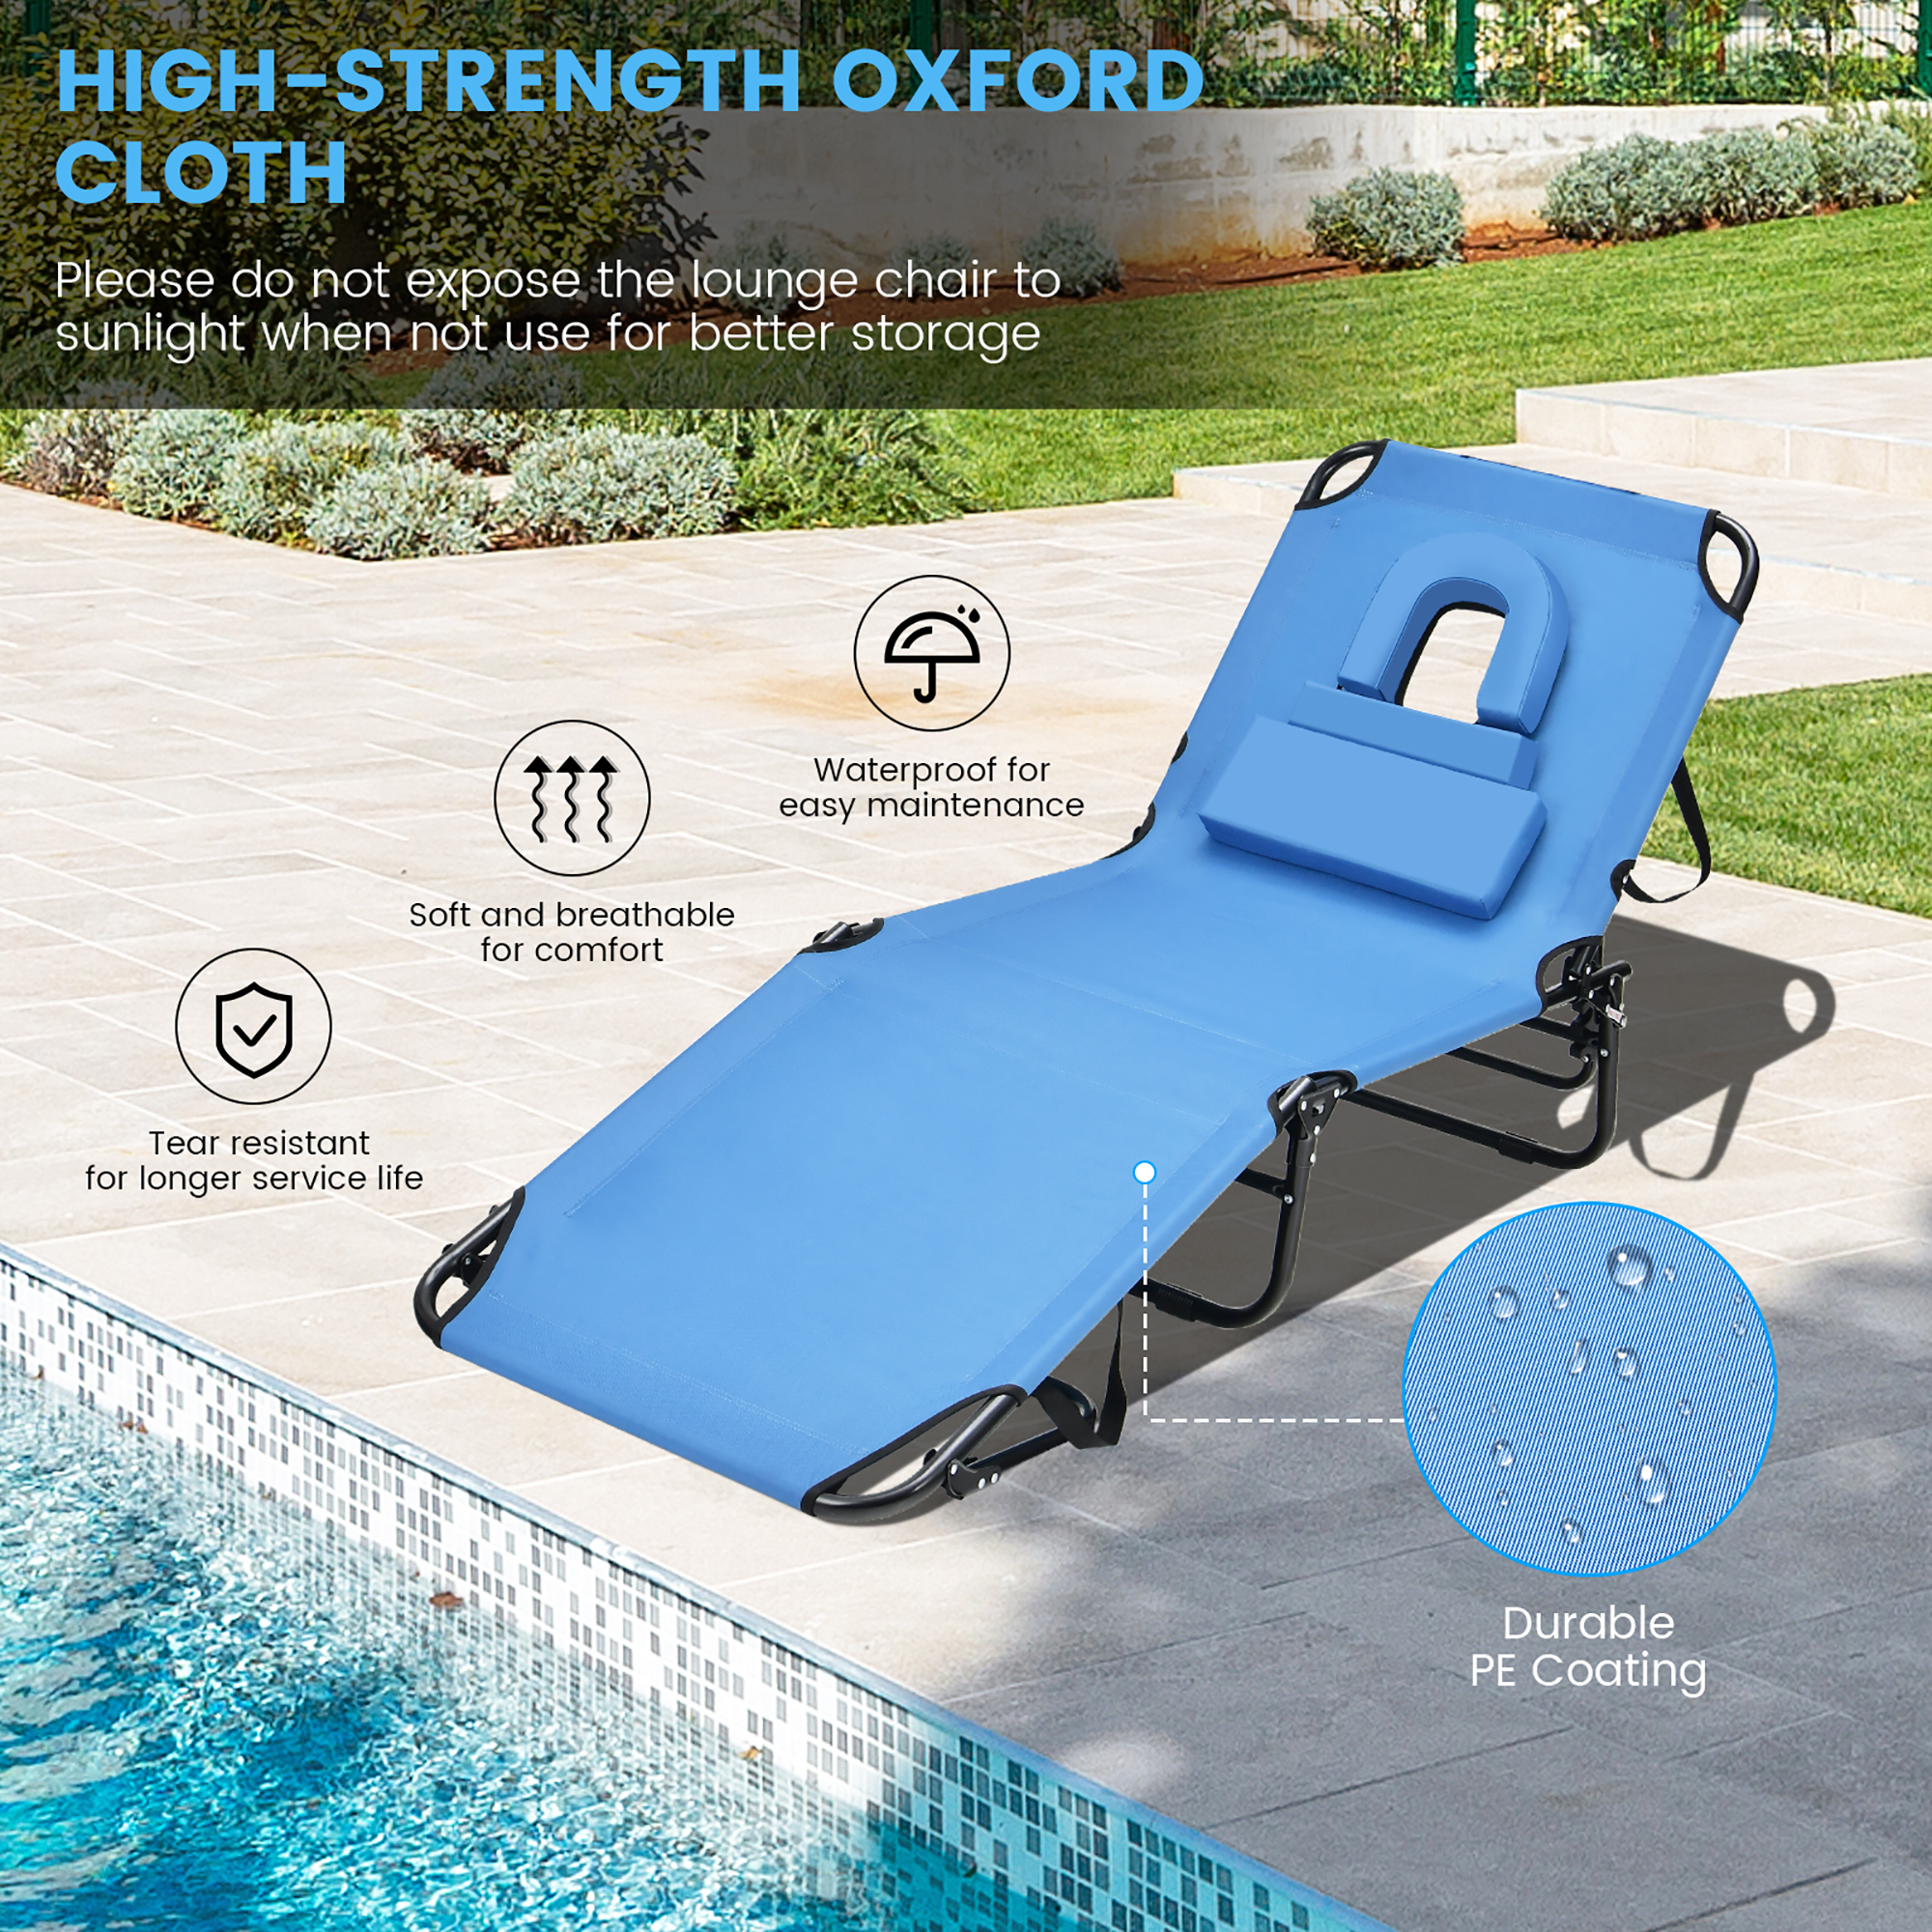 Costway 2 PCS Beach Chaise Lounge Chair with Face Hole Pillows & Adjustable Backrest Blue - image 4 of 10